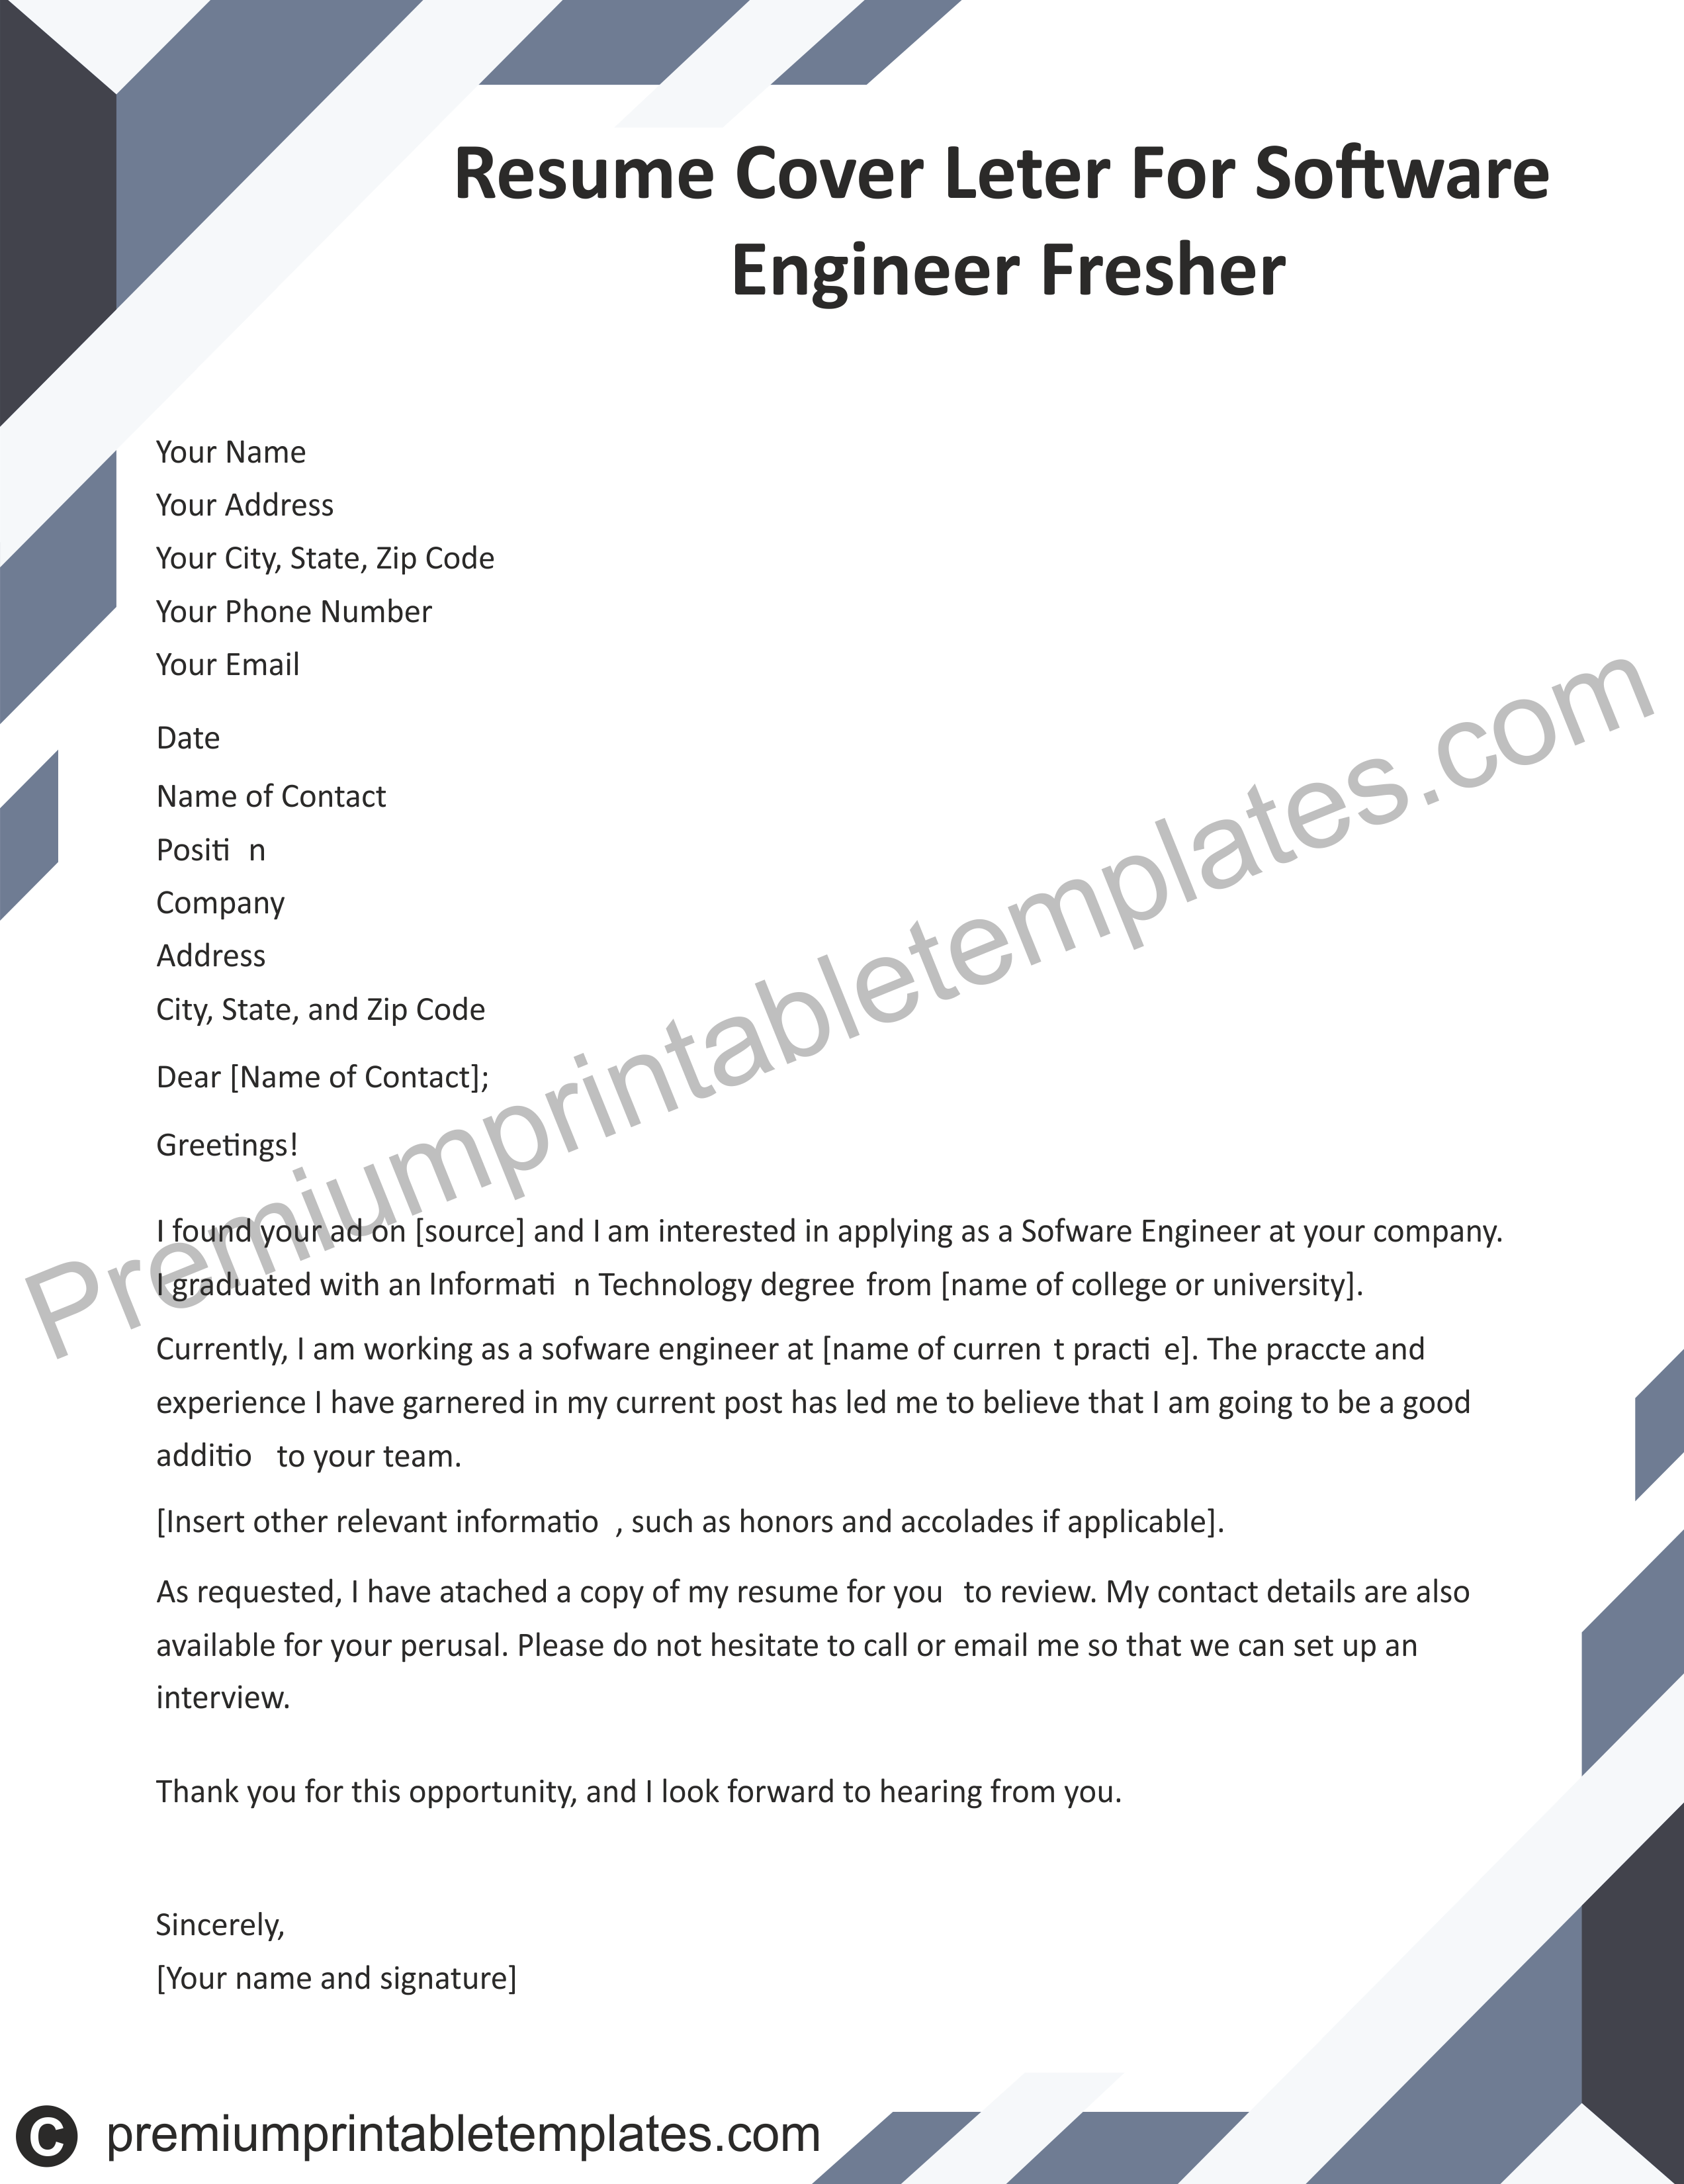 resume cover letter engineering